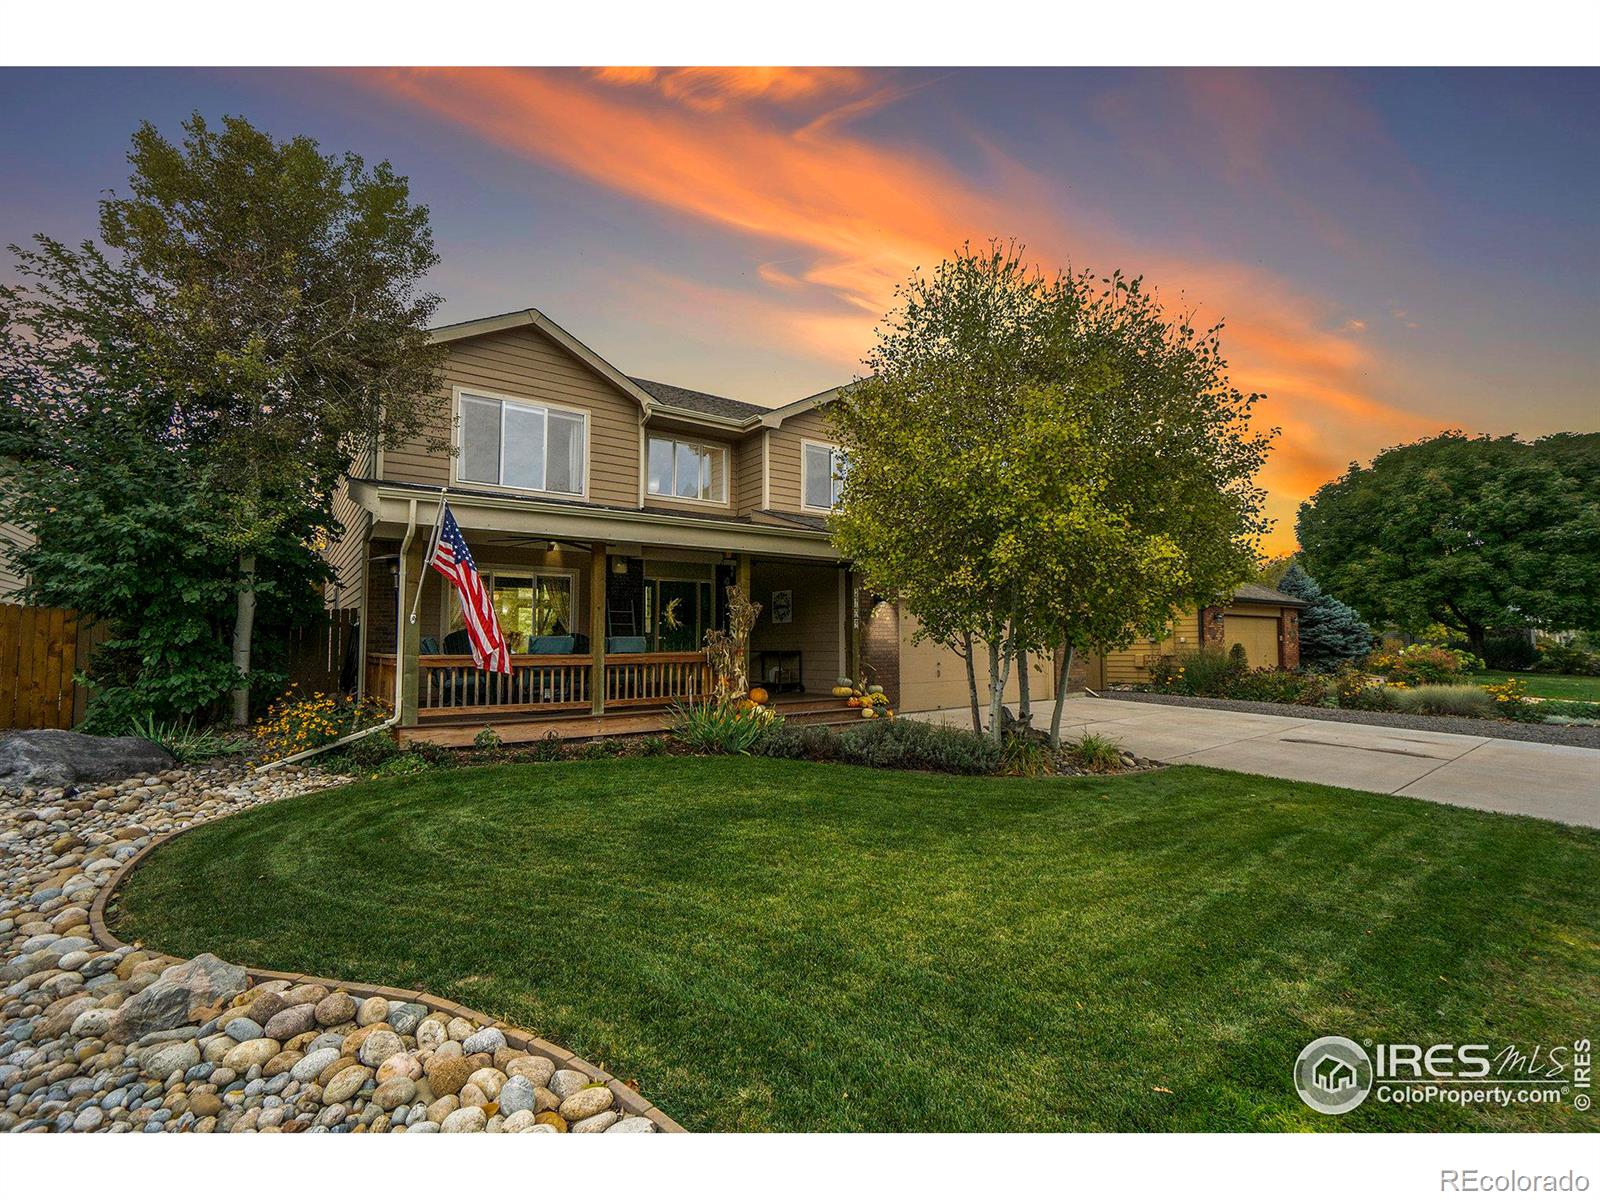 2709  Stonehaven Drive, fort collins MLS: 4567891001806 Beds: 5 Baths: 4 Price: $740,000